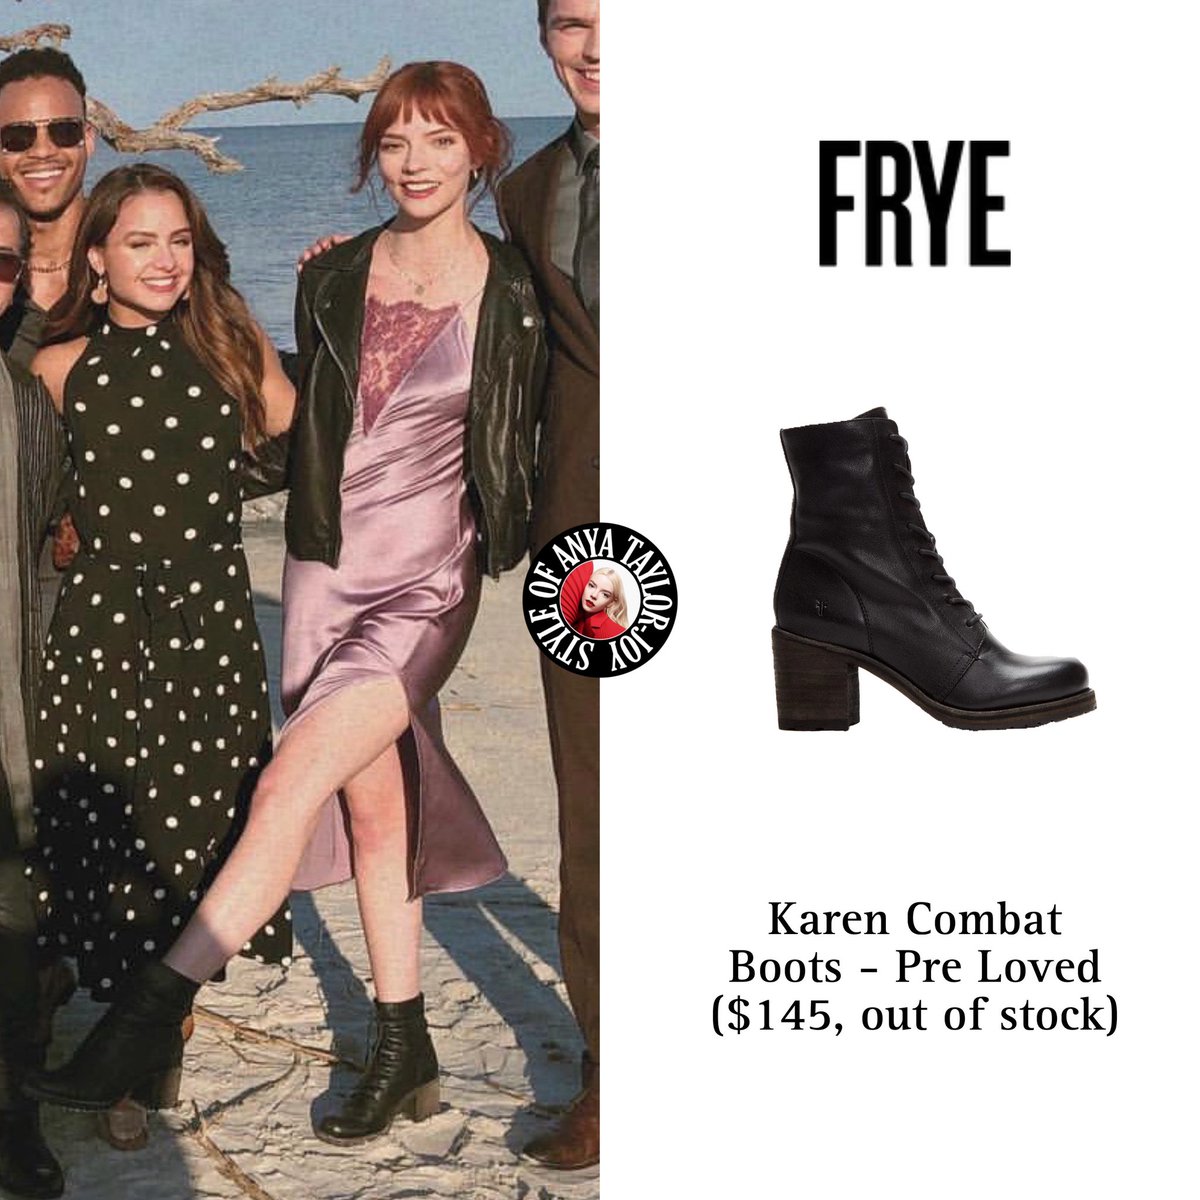 Anya Taylor-Joy’s costume in The Menu (2022)

- @fleurdumalnyc Margot Slip Dress ($495)
- @madewell Washed Leather Motorcycle Jacket in True Black ($525)
- @BaubleBar Spillo Earrings ($54)
- @TheFryeCompany Karen Combat Boots ($145, out of stock)